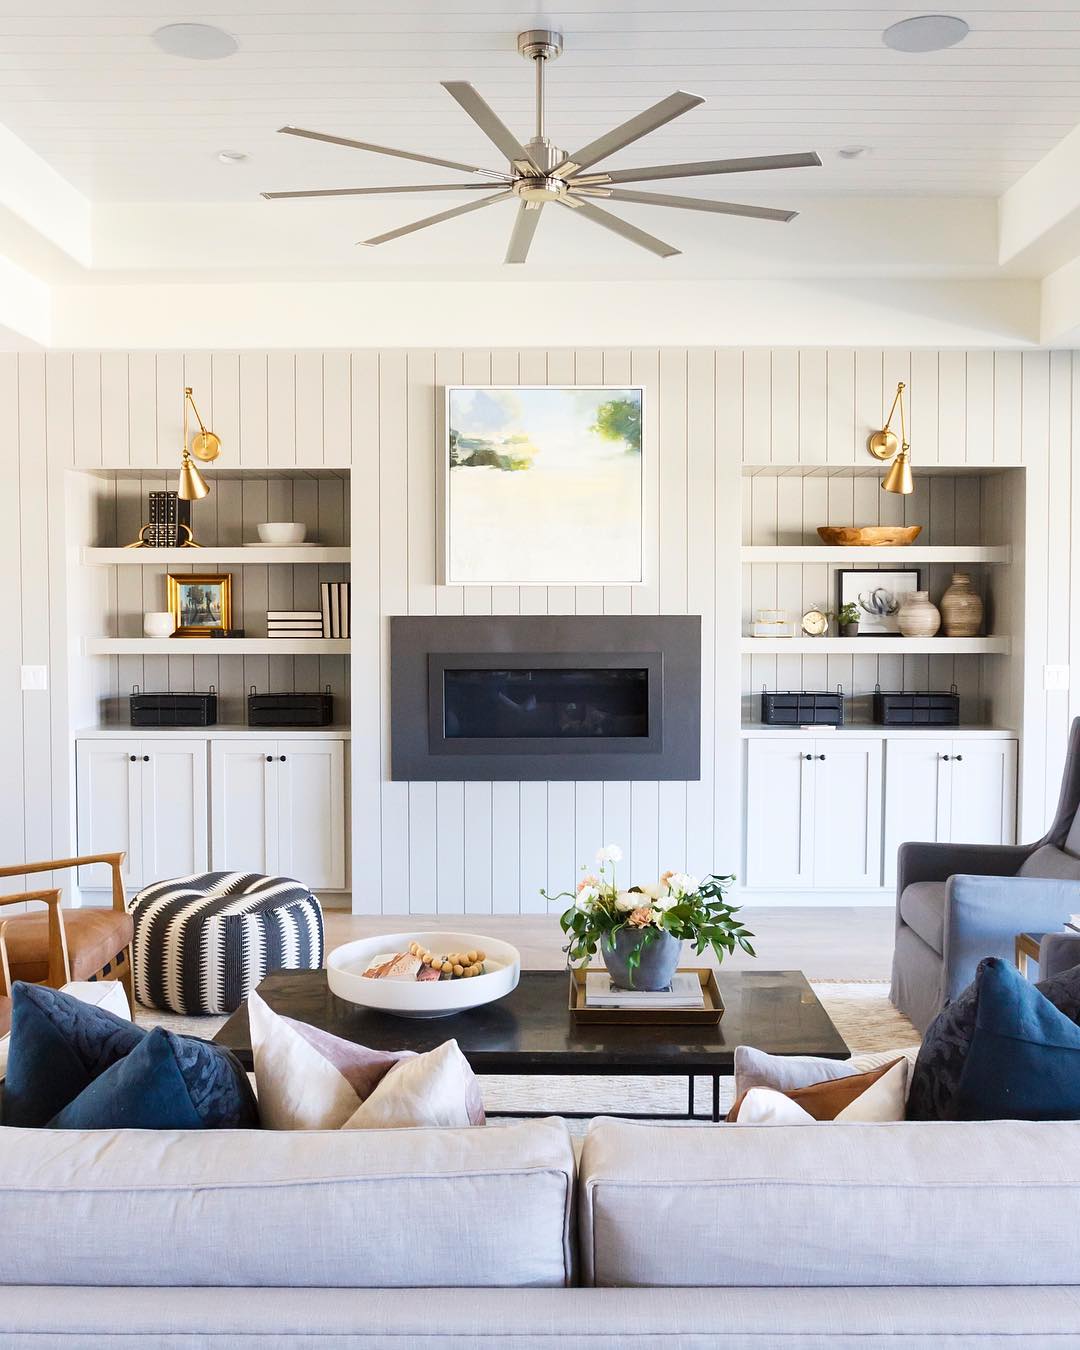 Modern living room with shiplap walls. Photo by Instagram user @saltboxcollective